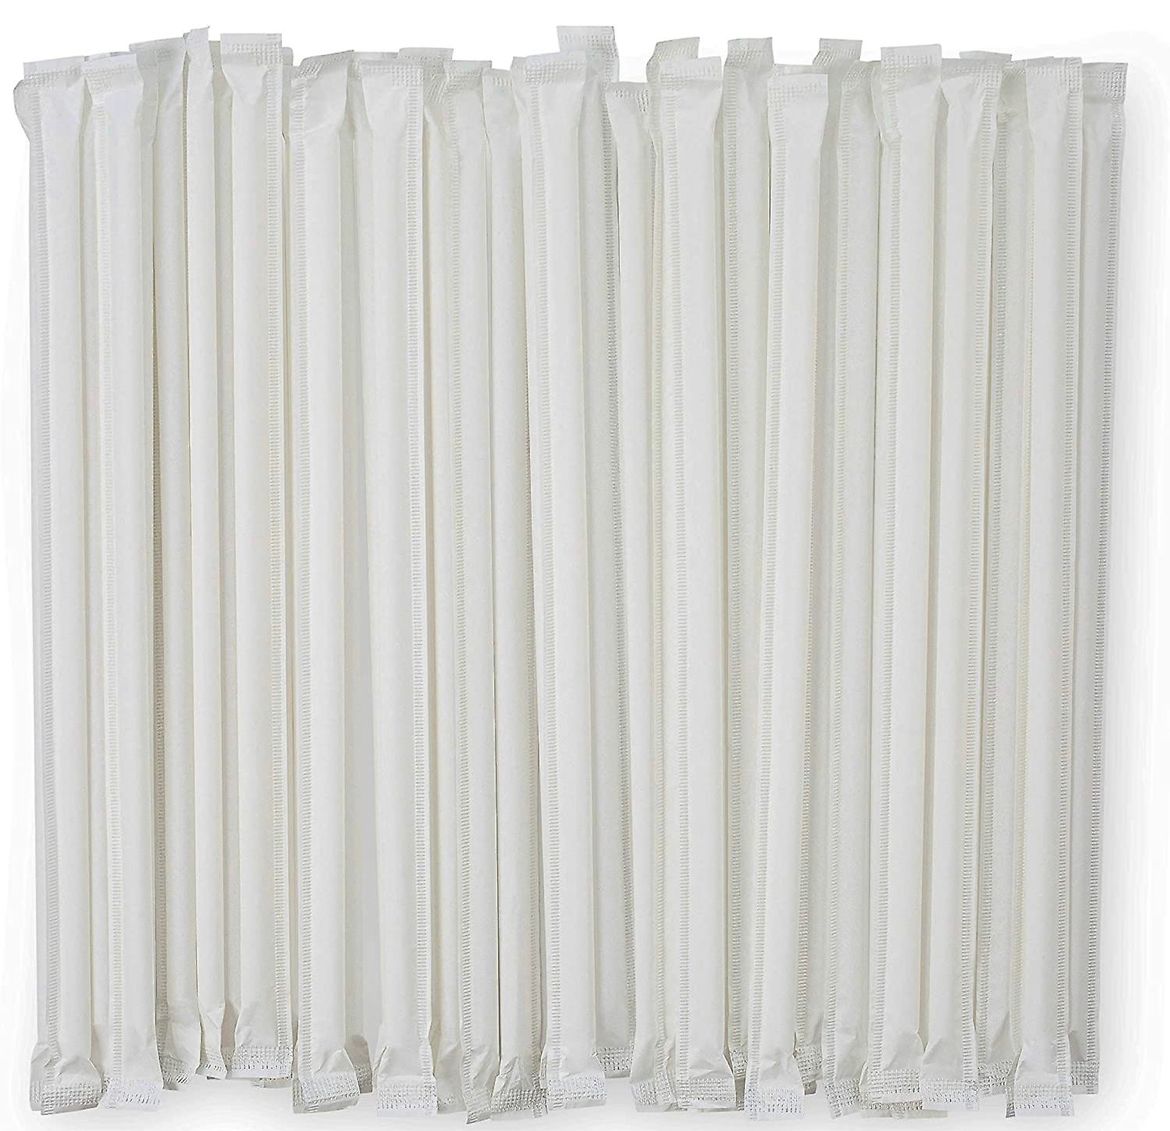 6mm Straight Straw Wrapped 250X40 Packets